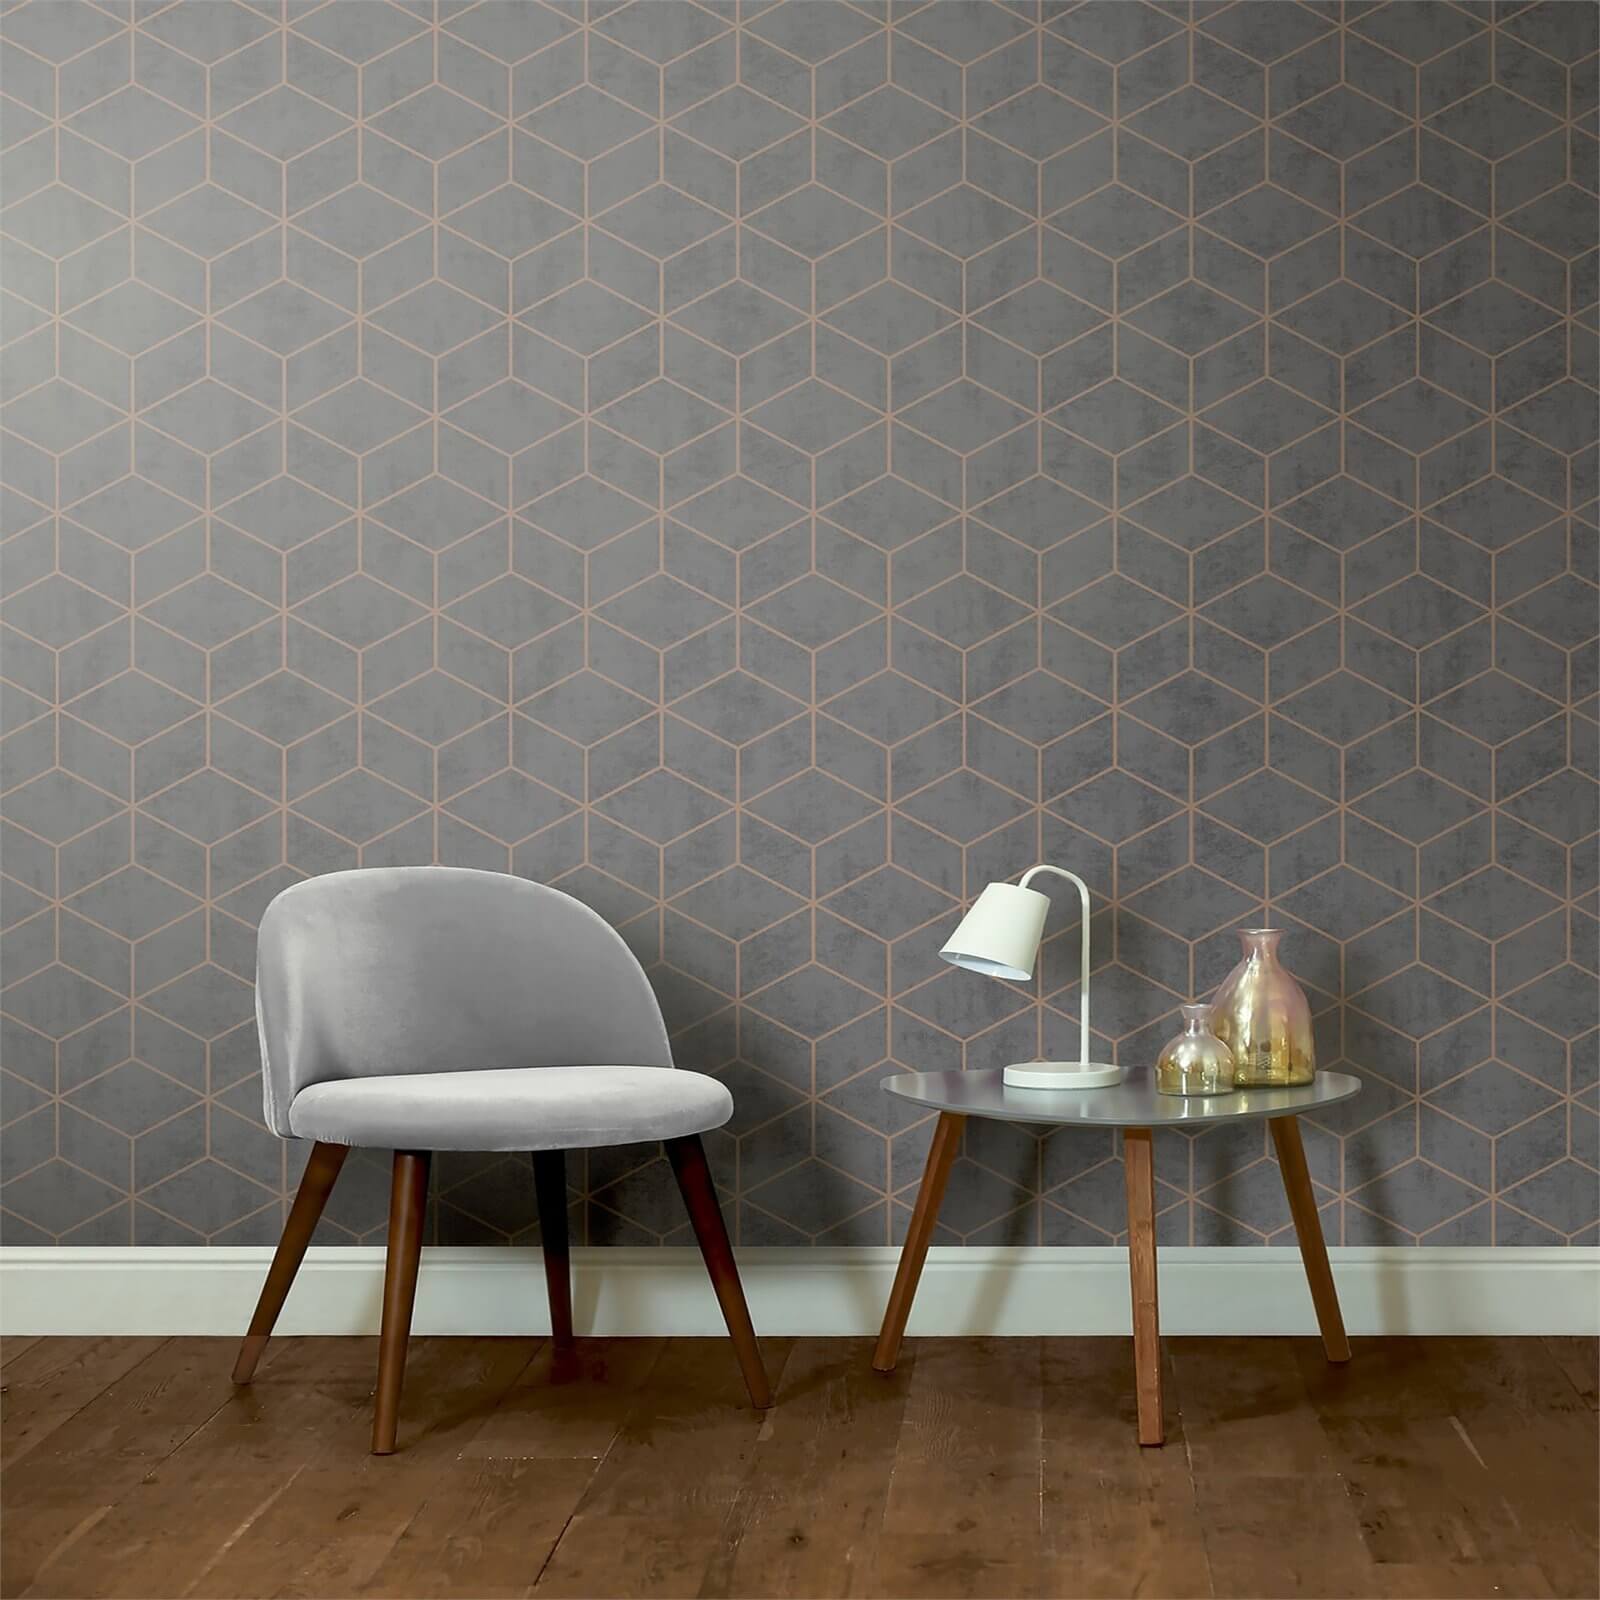 Arthouse Box Geometric Smooth Metallic Charcoal and Copper Wallpaper